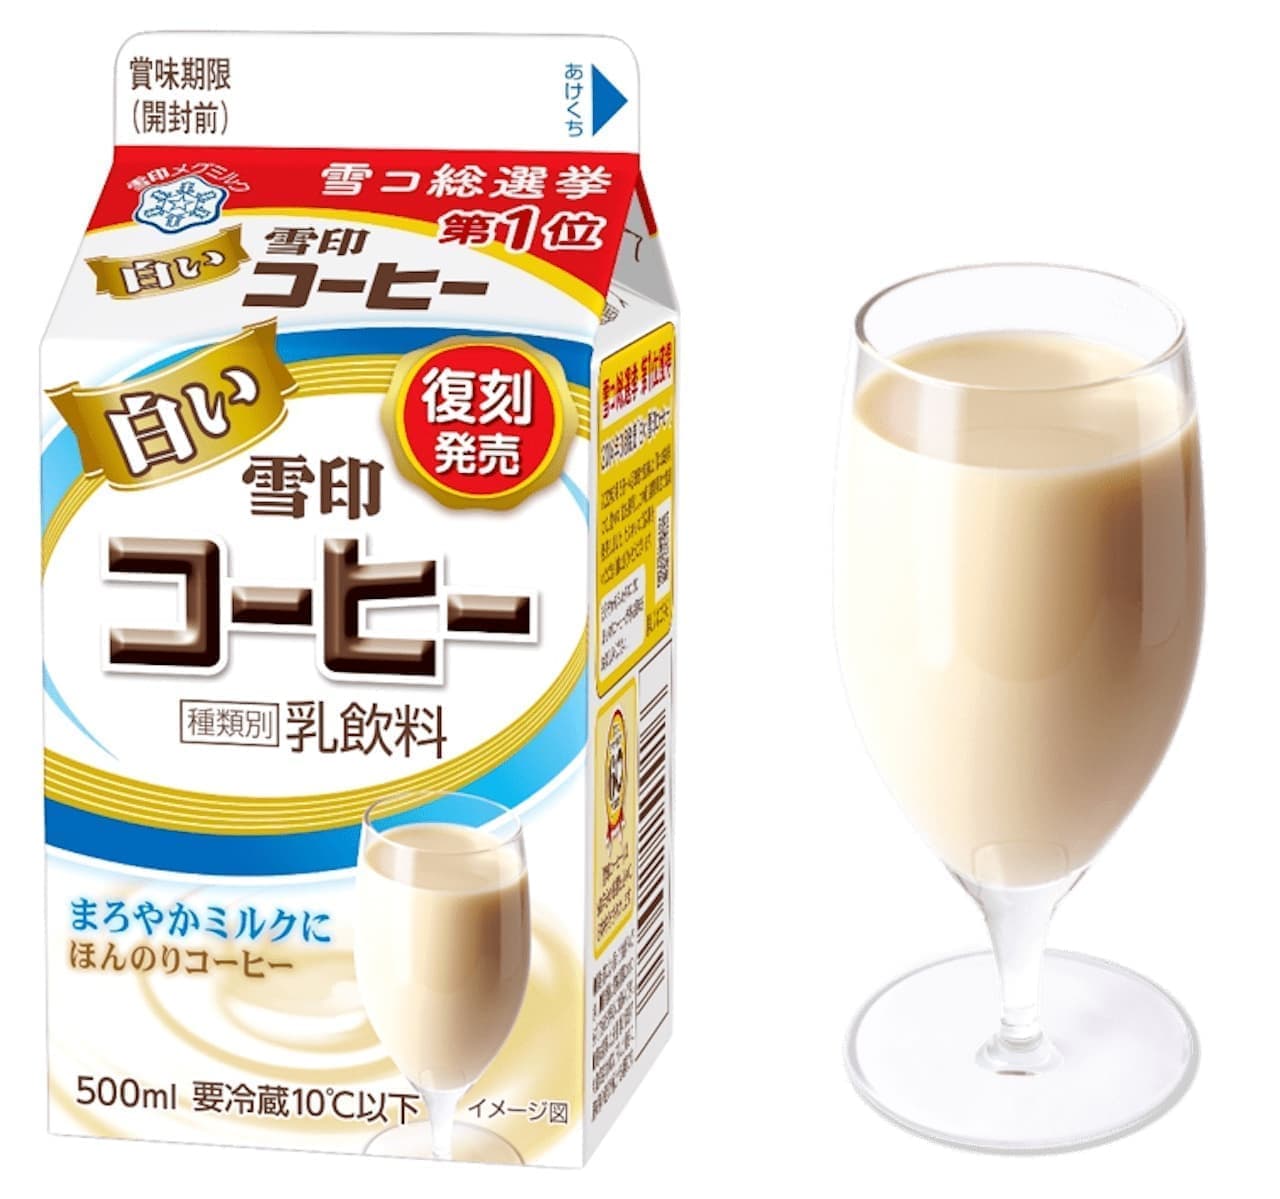 White Snow Brand Coffee" from Snow Brand Megmilk for a limited time.